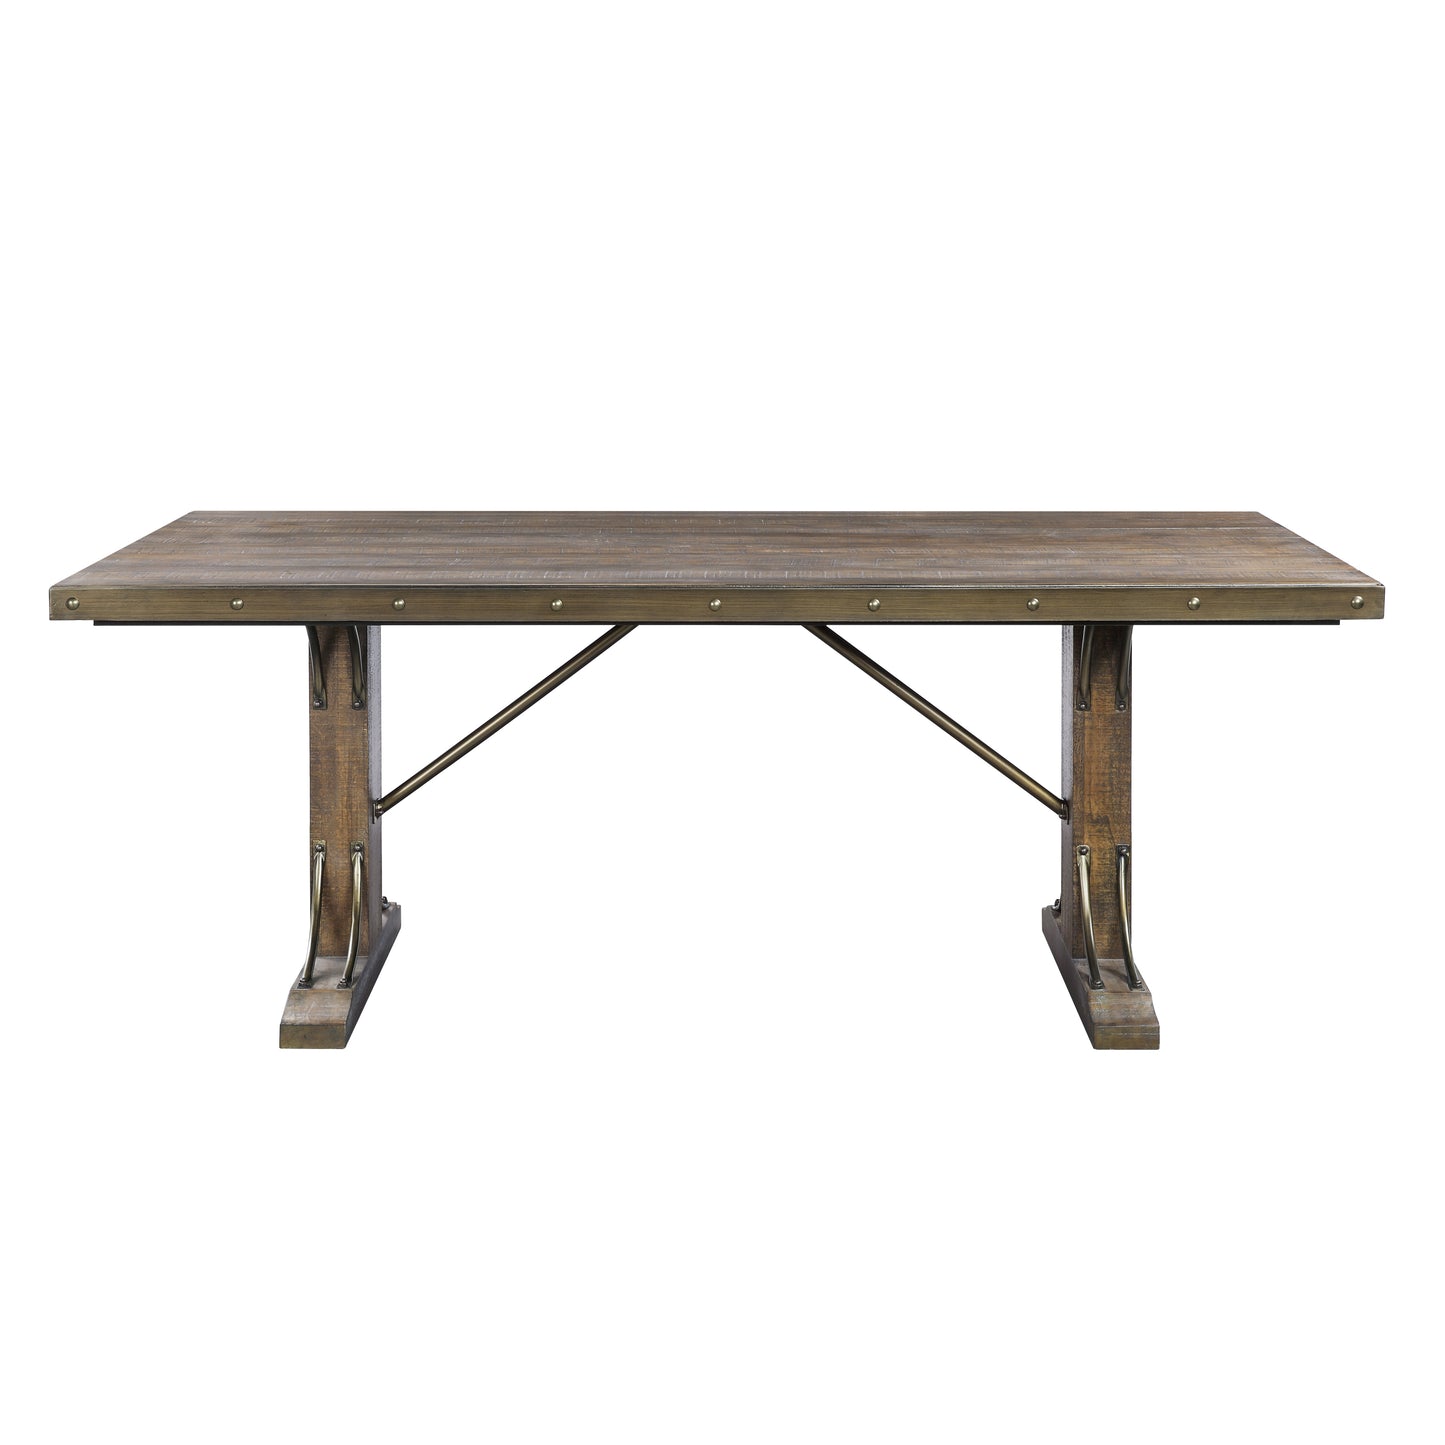 Raphaela Dining Table in Weathered Cherry Finish